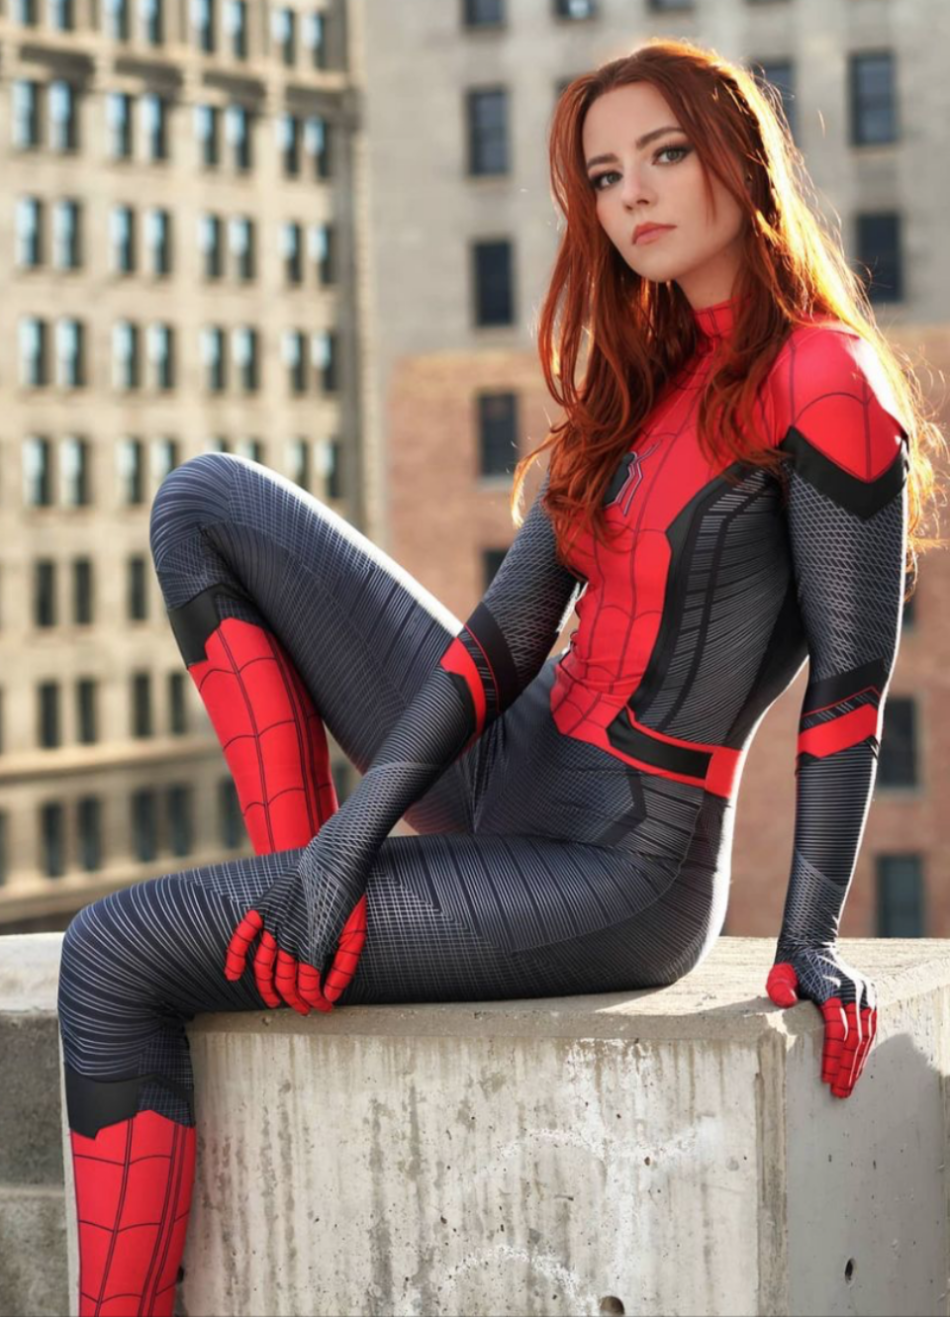 Sexy Red Hot Cosplay Girls Spiderman Women Best Photo Compilation 2021 (89 HQ Photos) 157